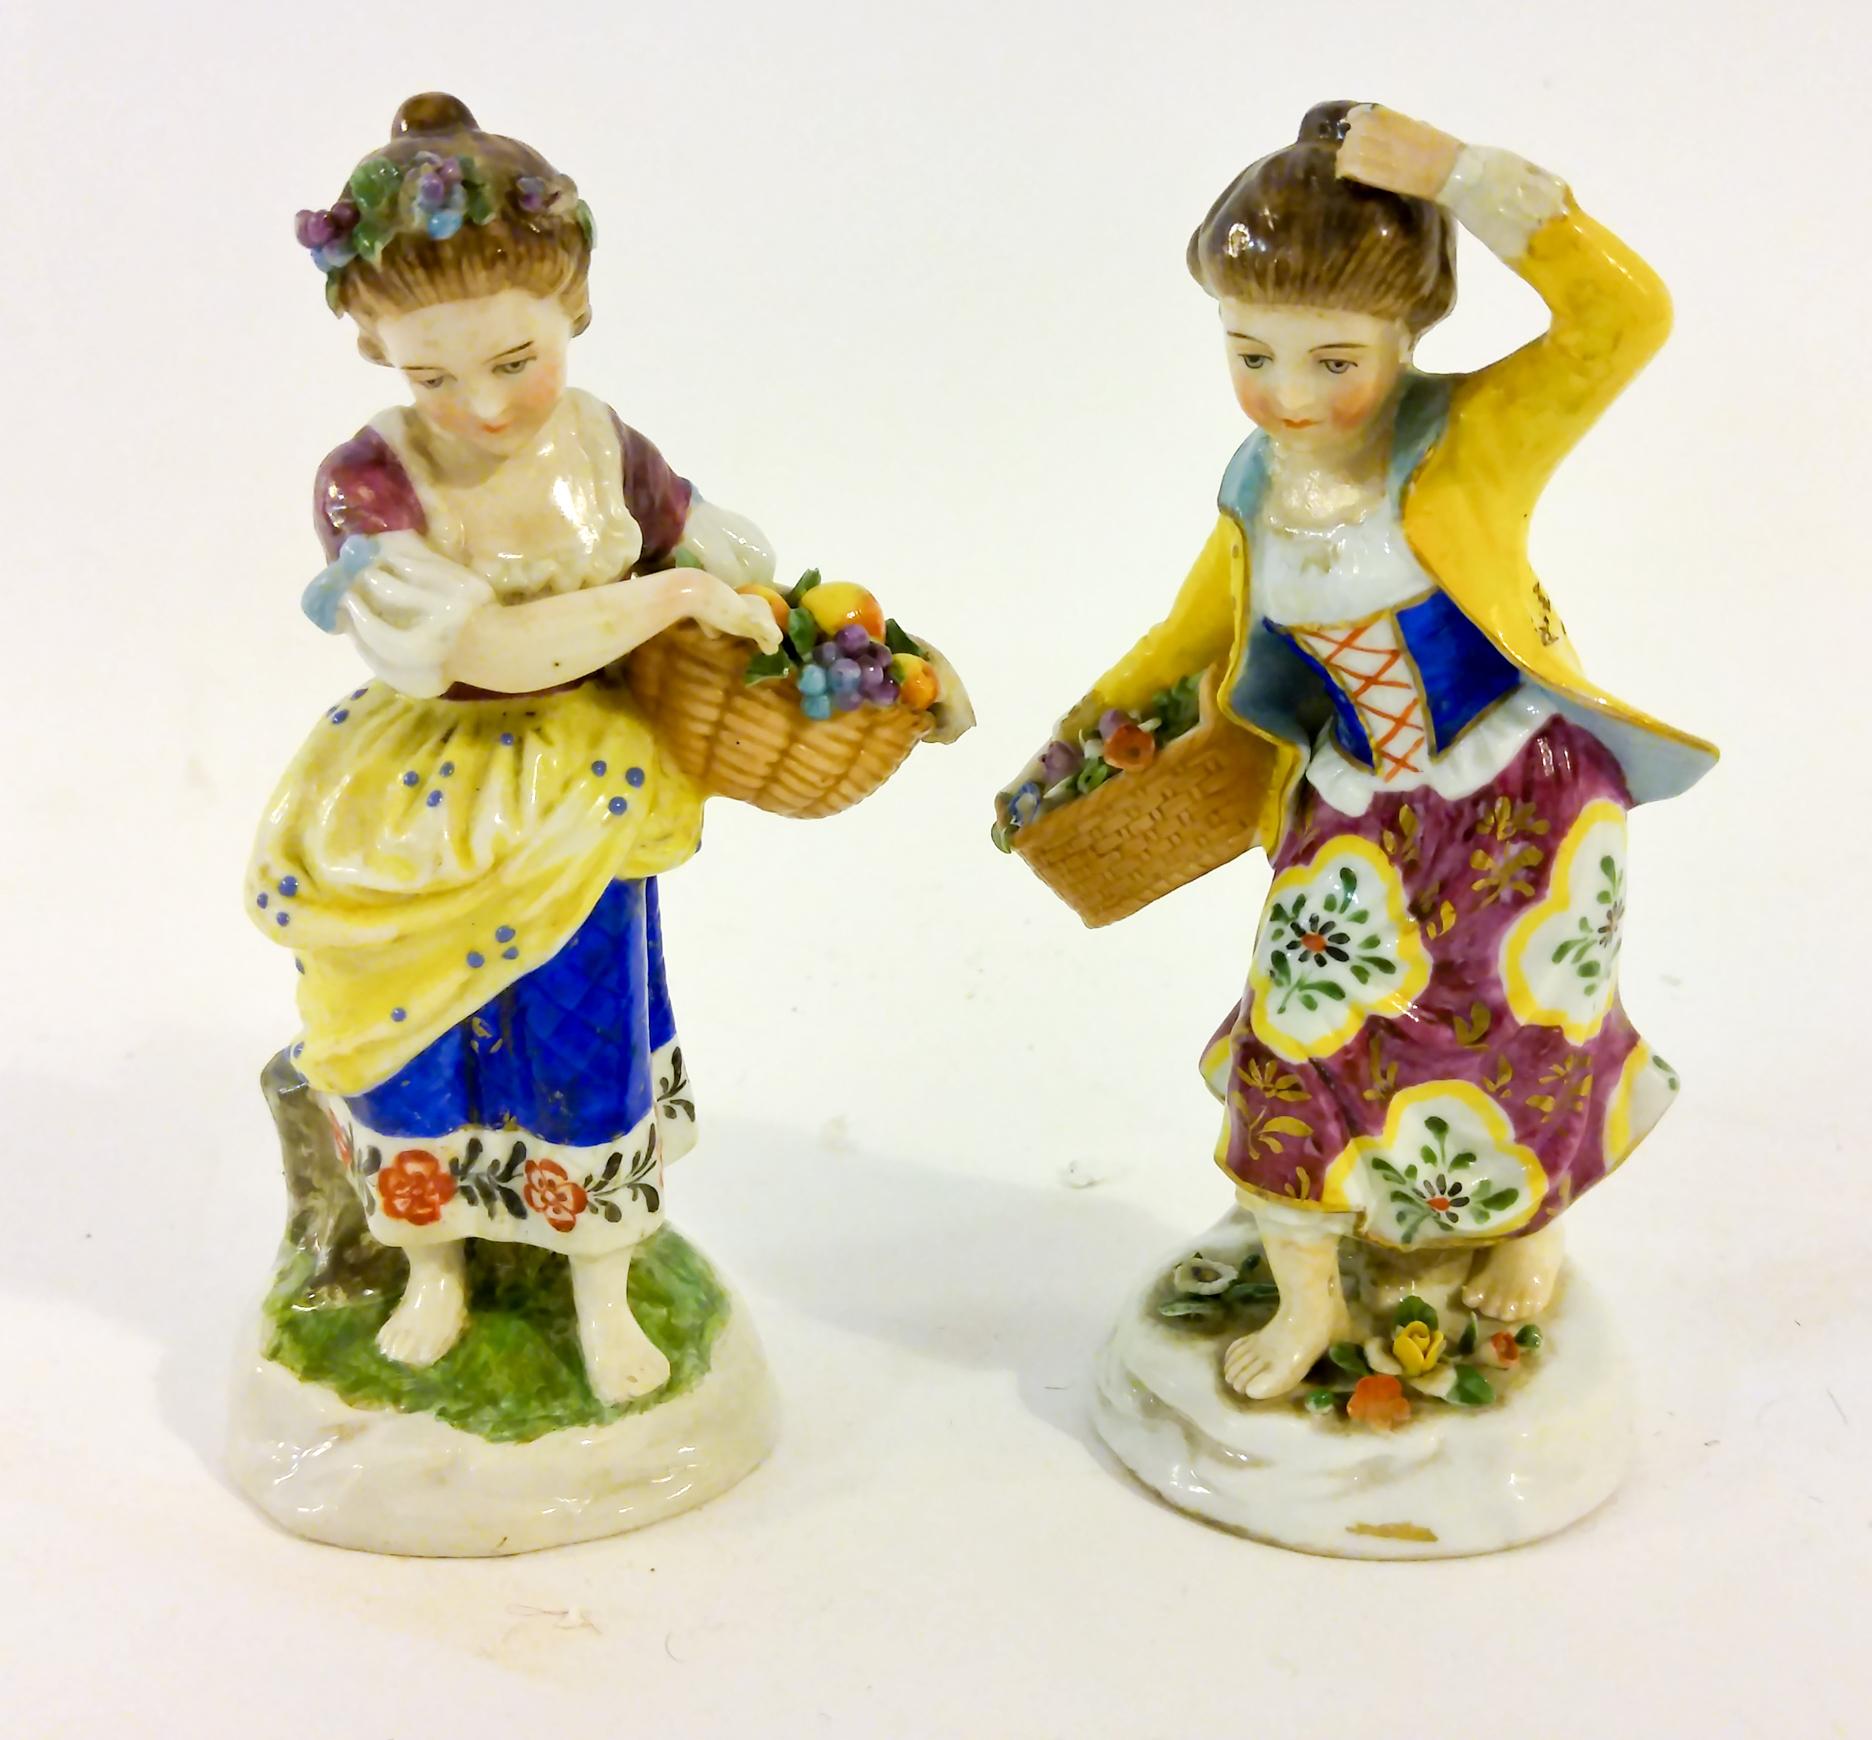 Charming pair of very intricate figurines of barefoot young girls, one gathering a basket of fruit and the other flowers. Only one is marked (with the gold anchor.) The colors are very brilliant and the details are incredible. 